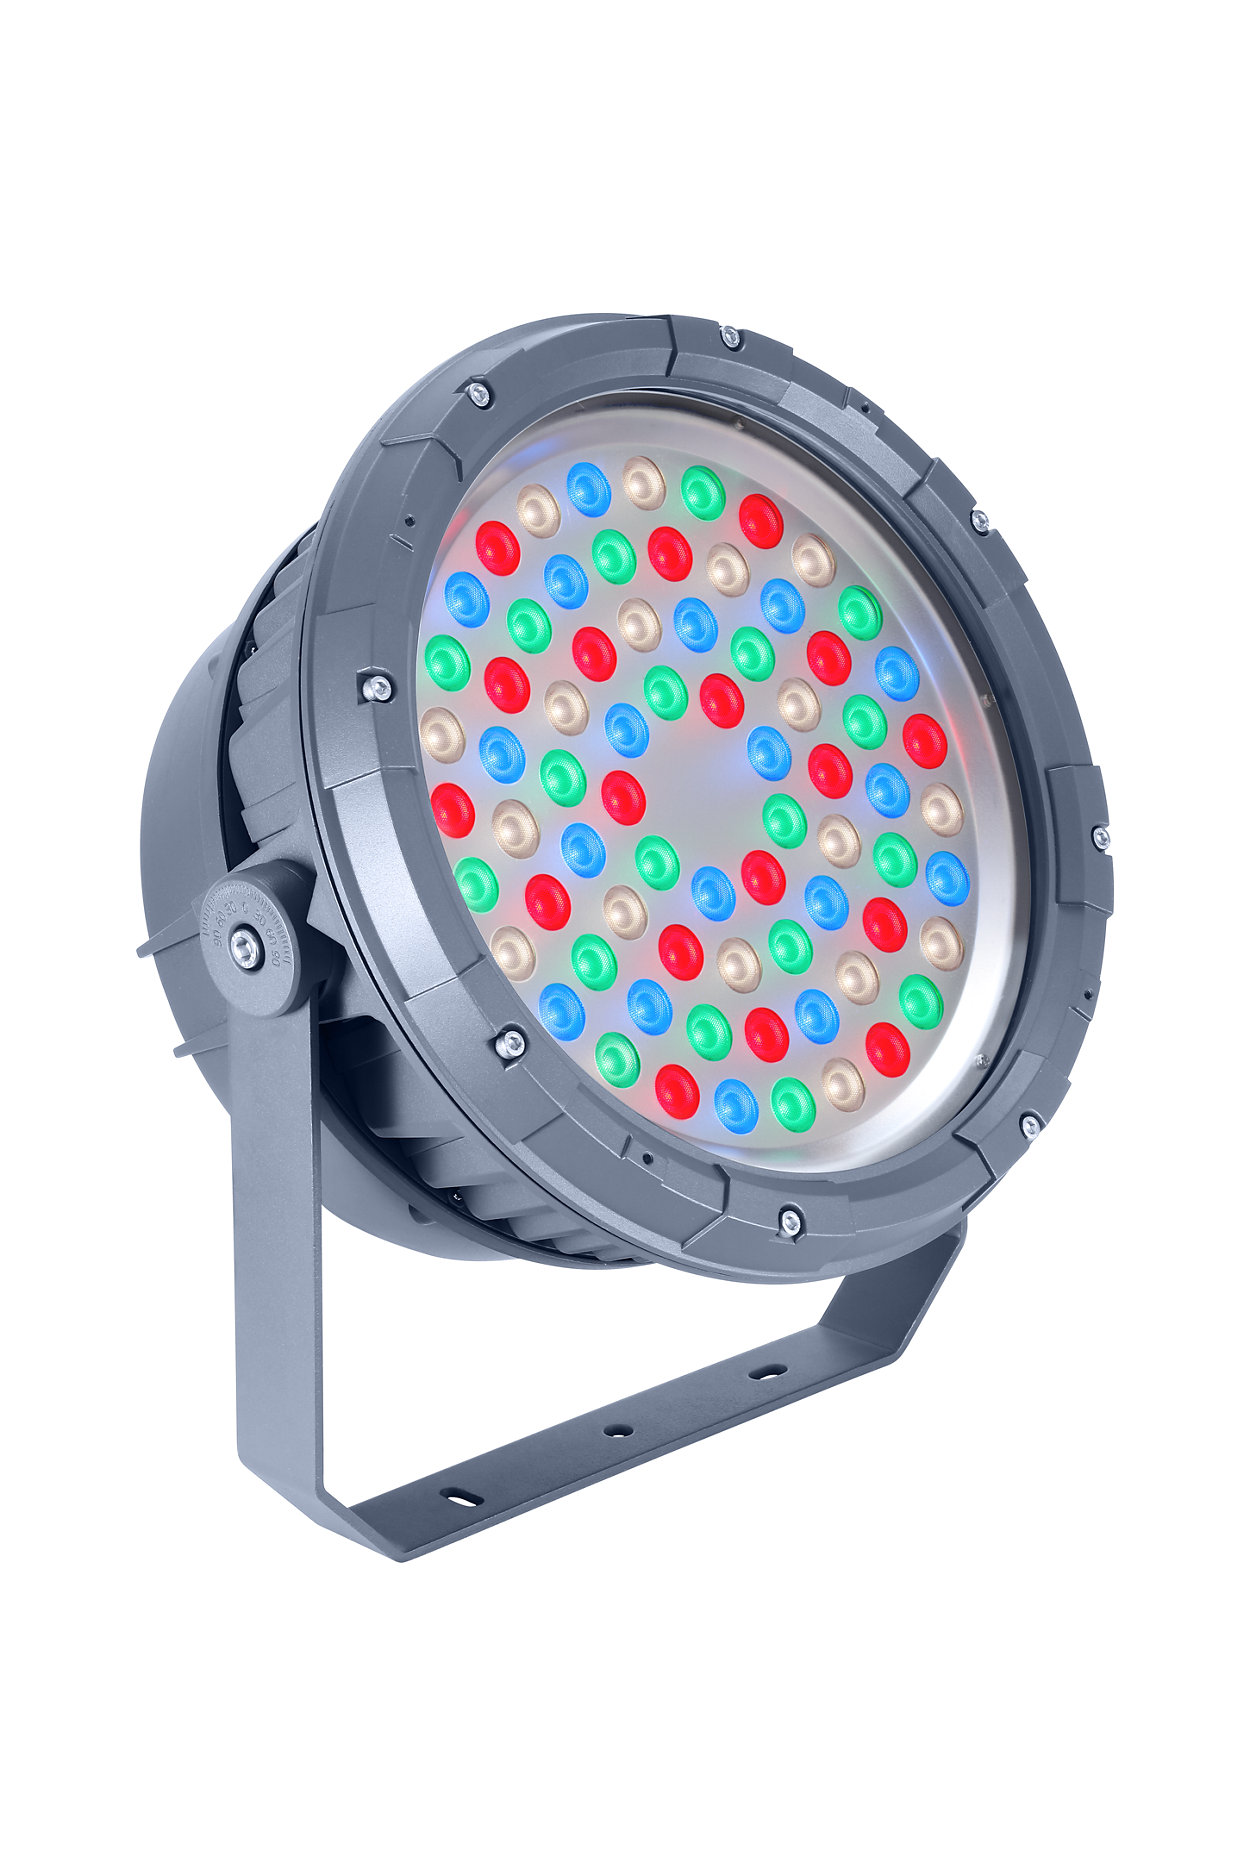 Architectural LED floodlight for fixed or dynamic lighting.